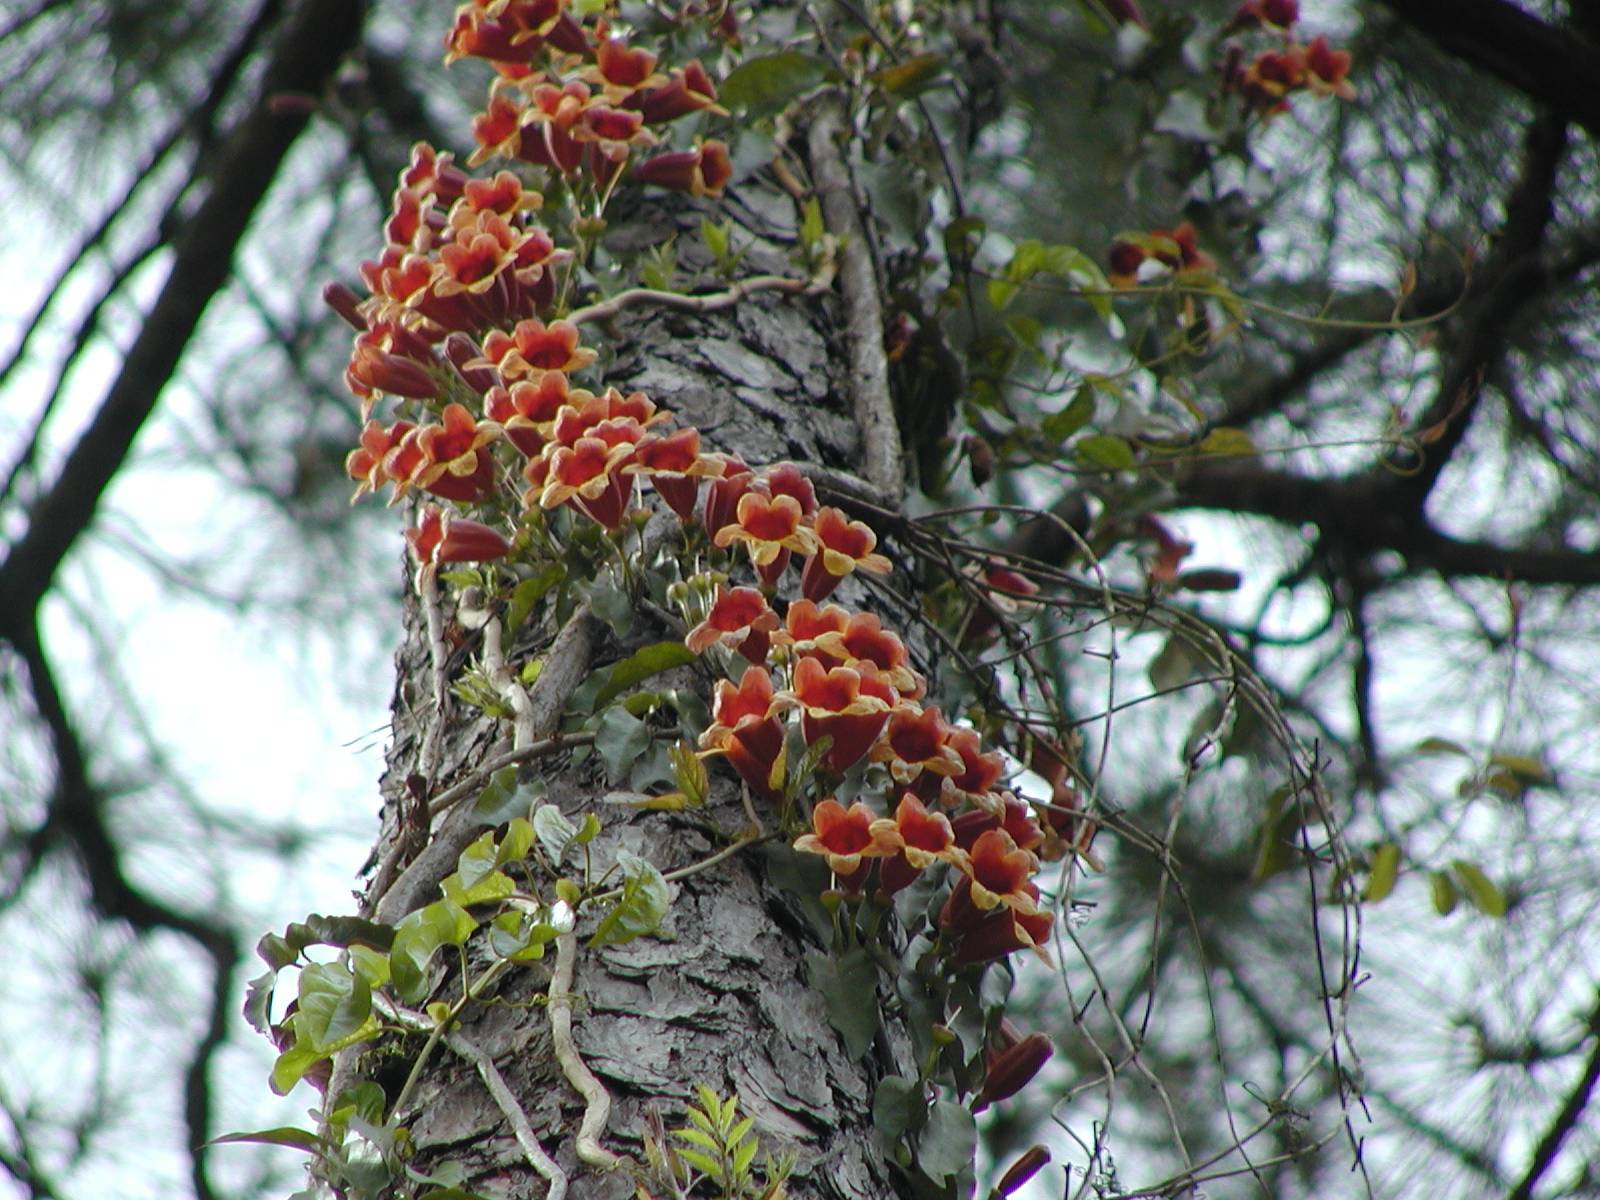 Red-yellow Flowers on gray bark, gray-brown branches and green leaves.